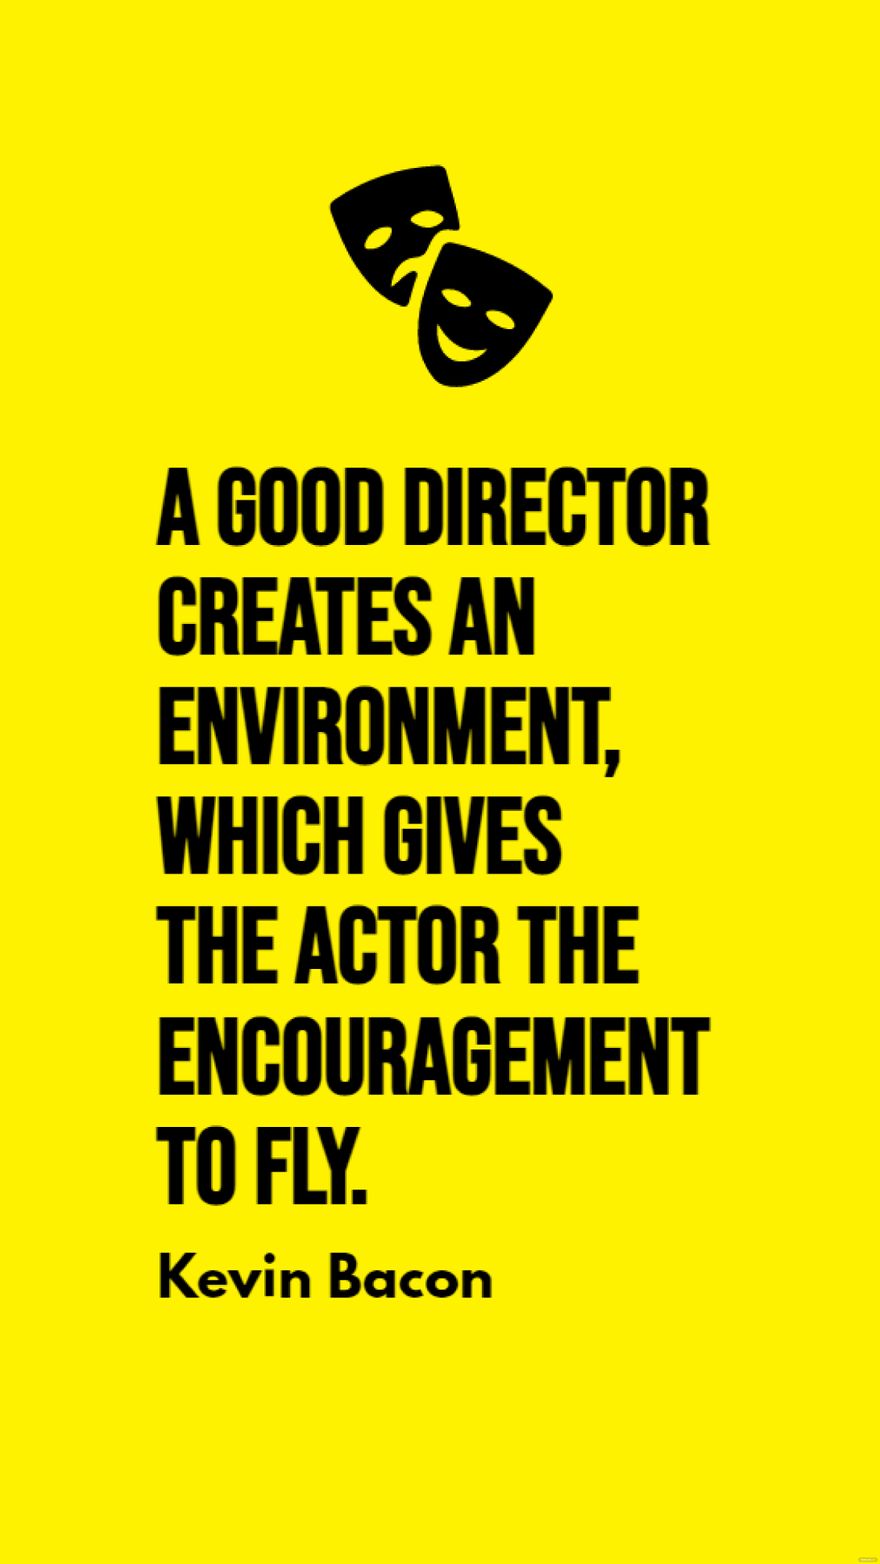 Kevin Bacon - A good director creates an environment, which gives the actor the encouragement to fly.